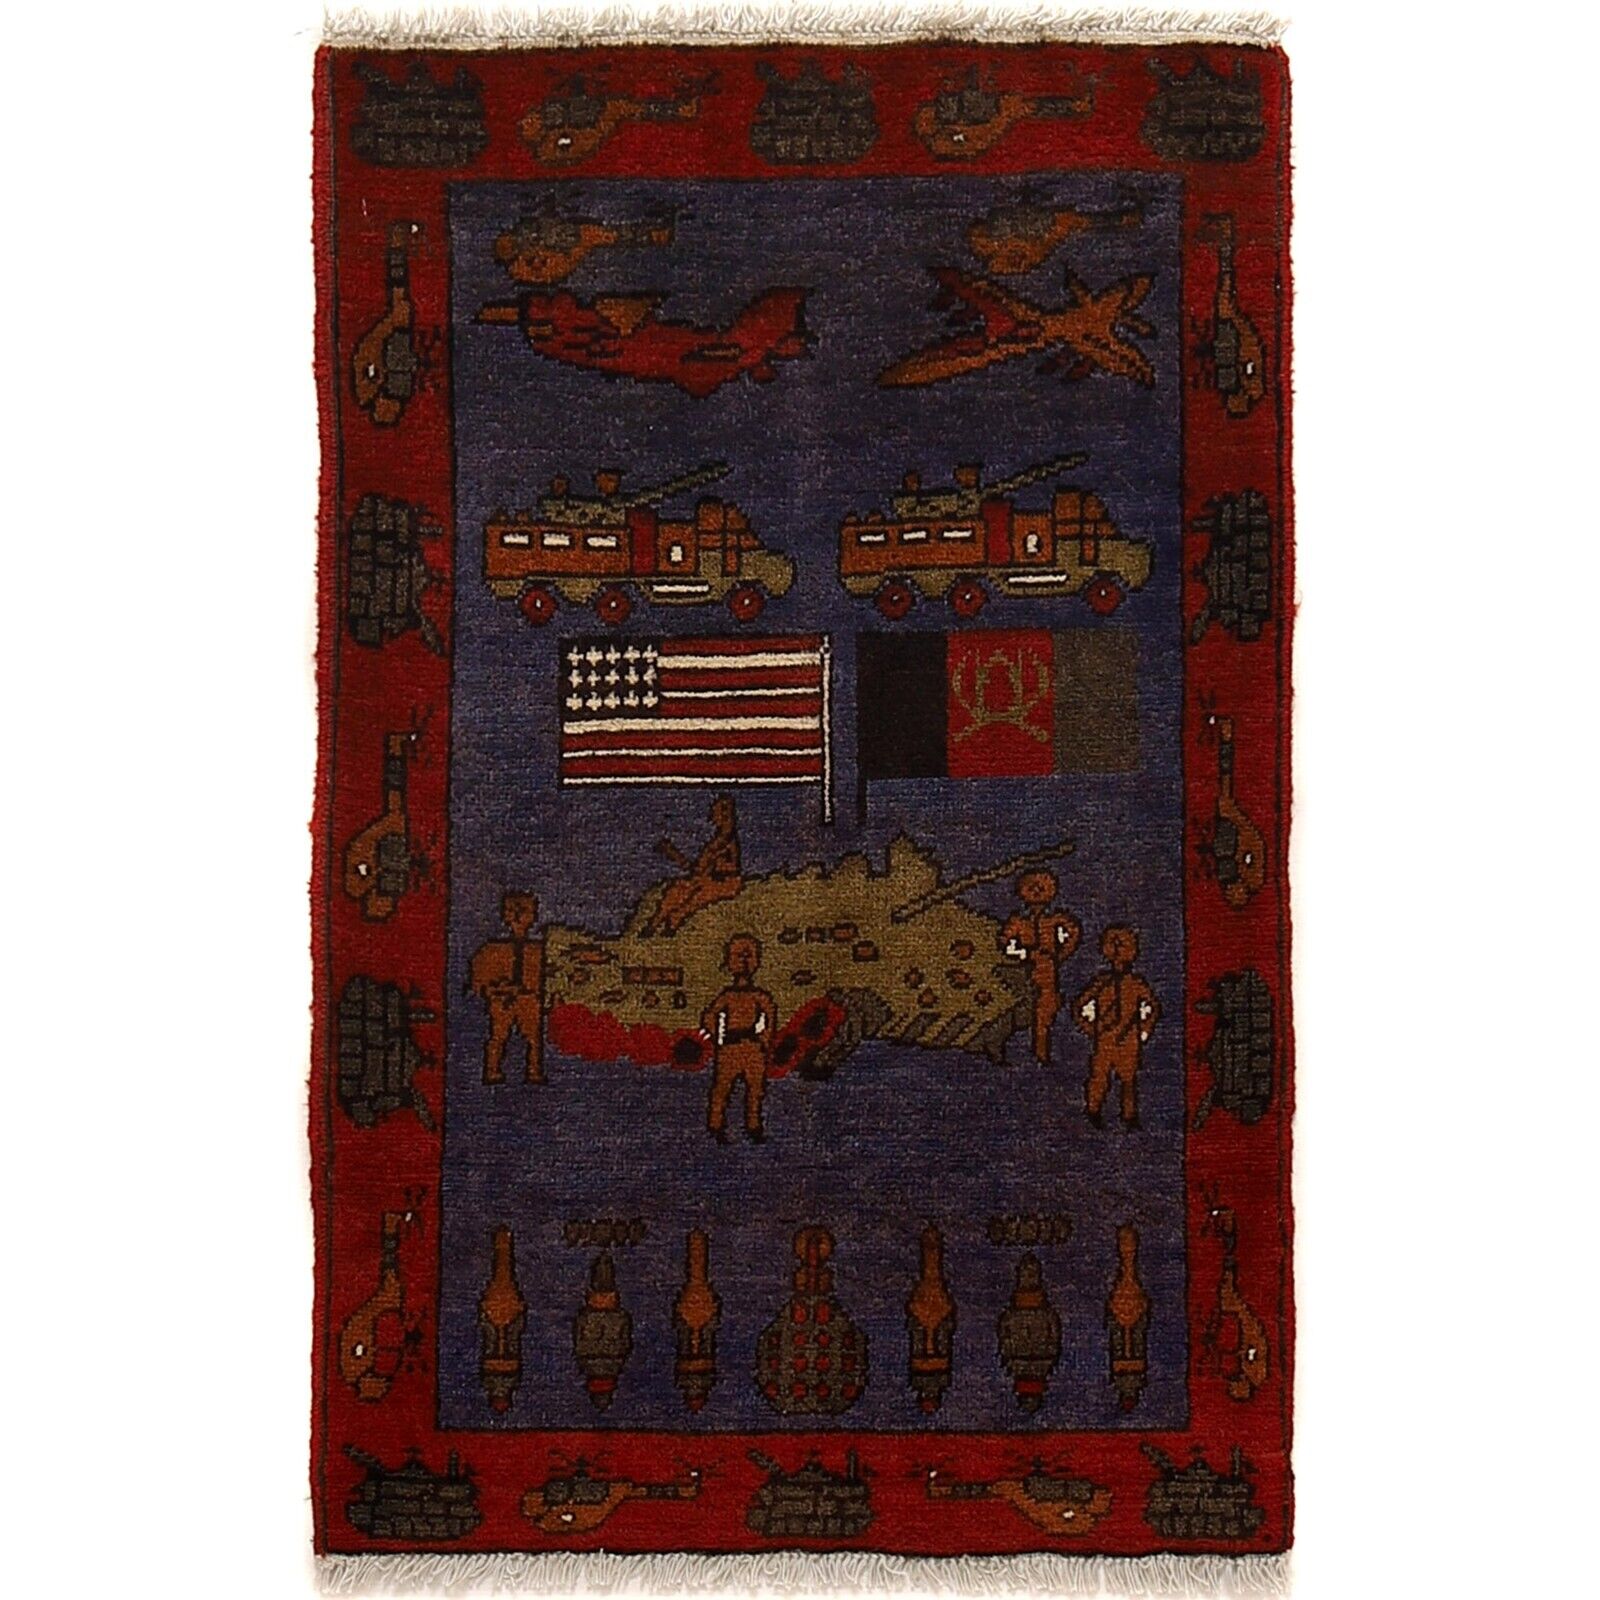 Afghan Woolen Pictorial Style War Rugs Whole Sale prices in Dark Colors Theme